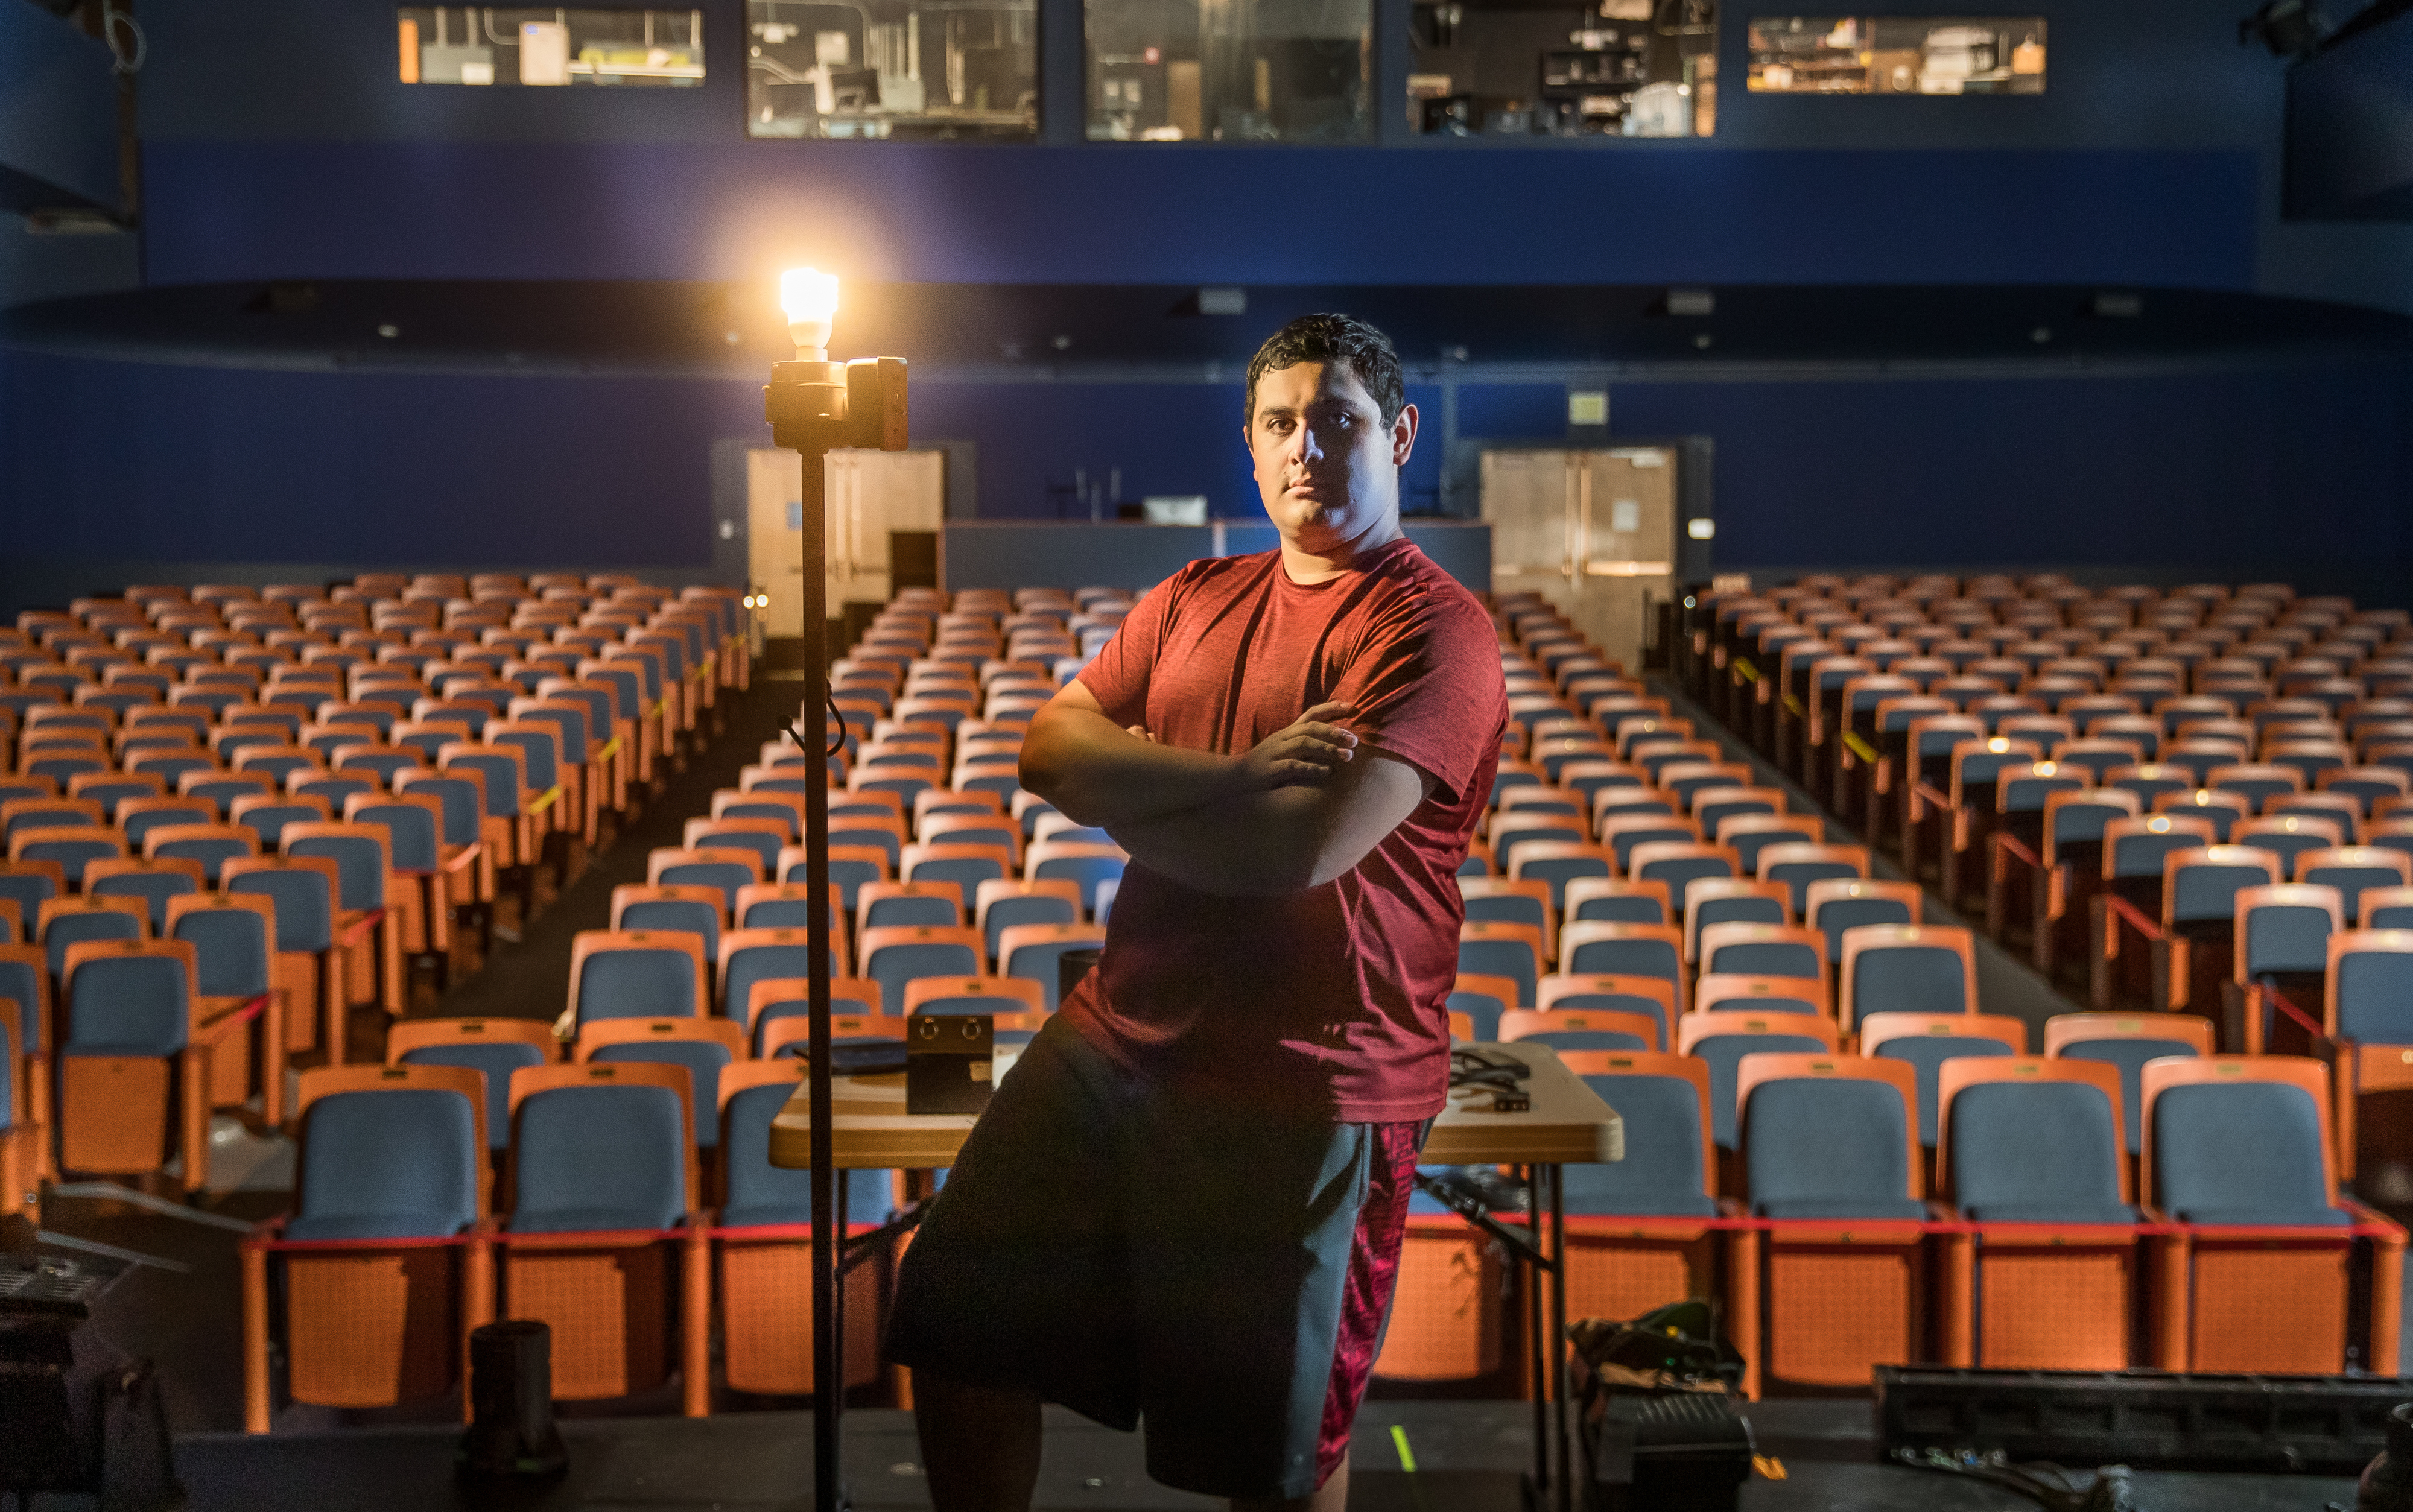 Arteaga stands on stage in front of empty theater